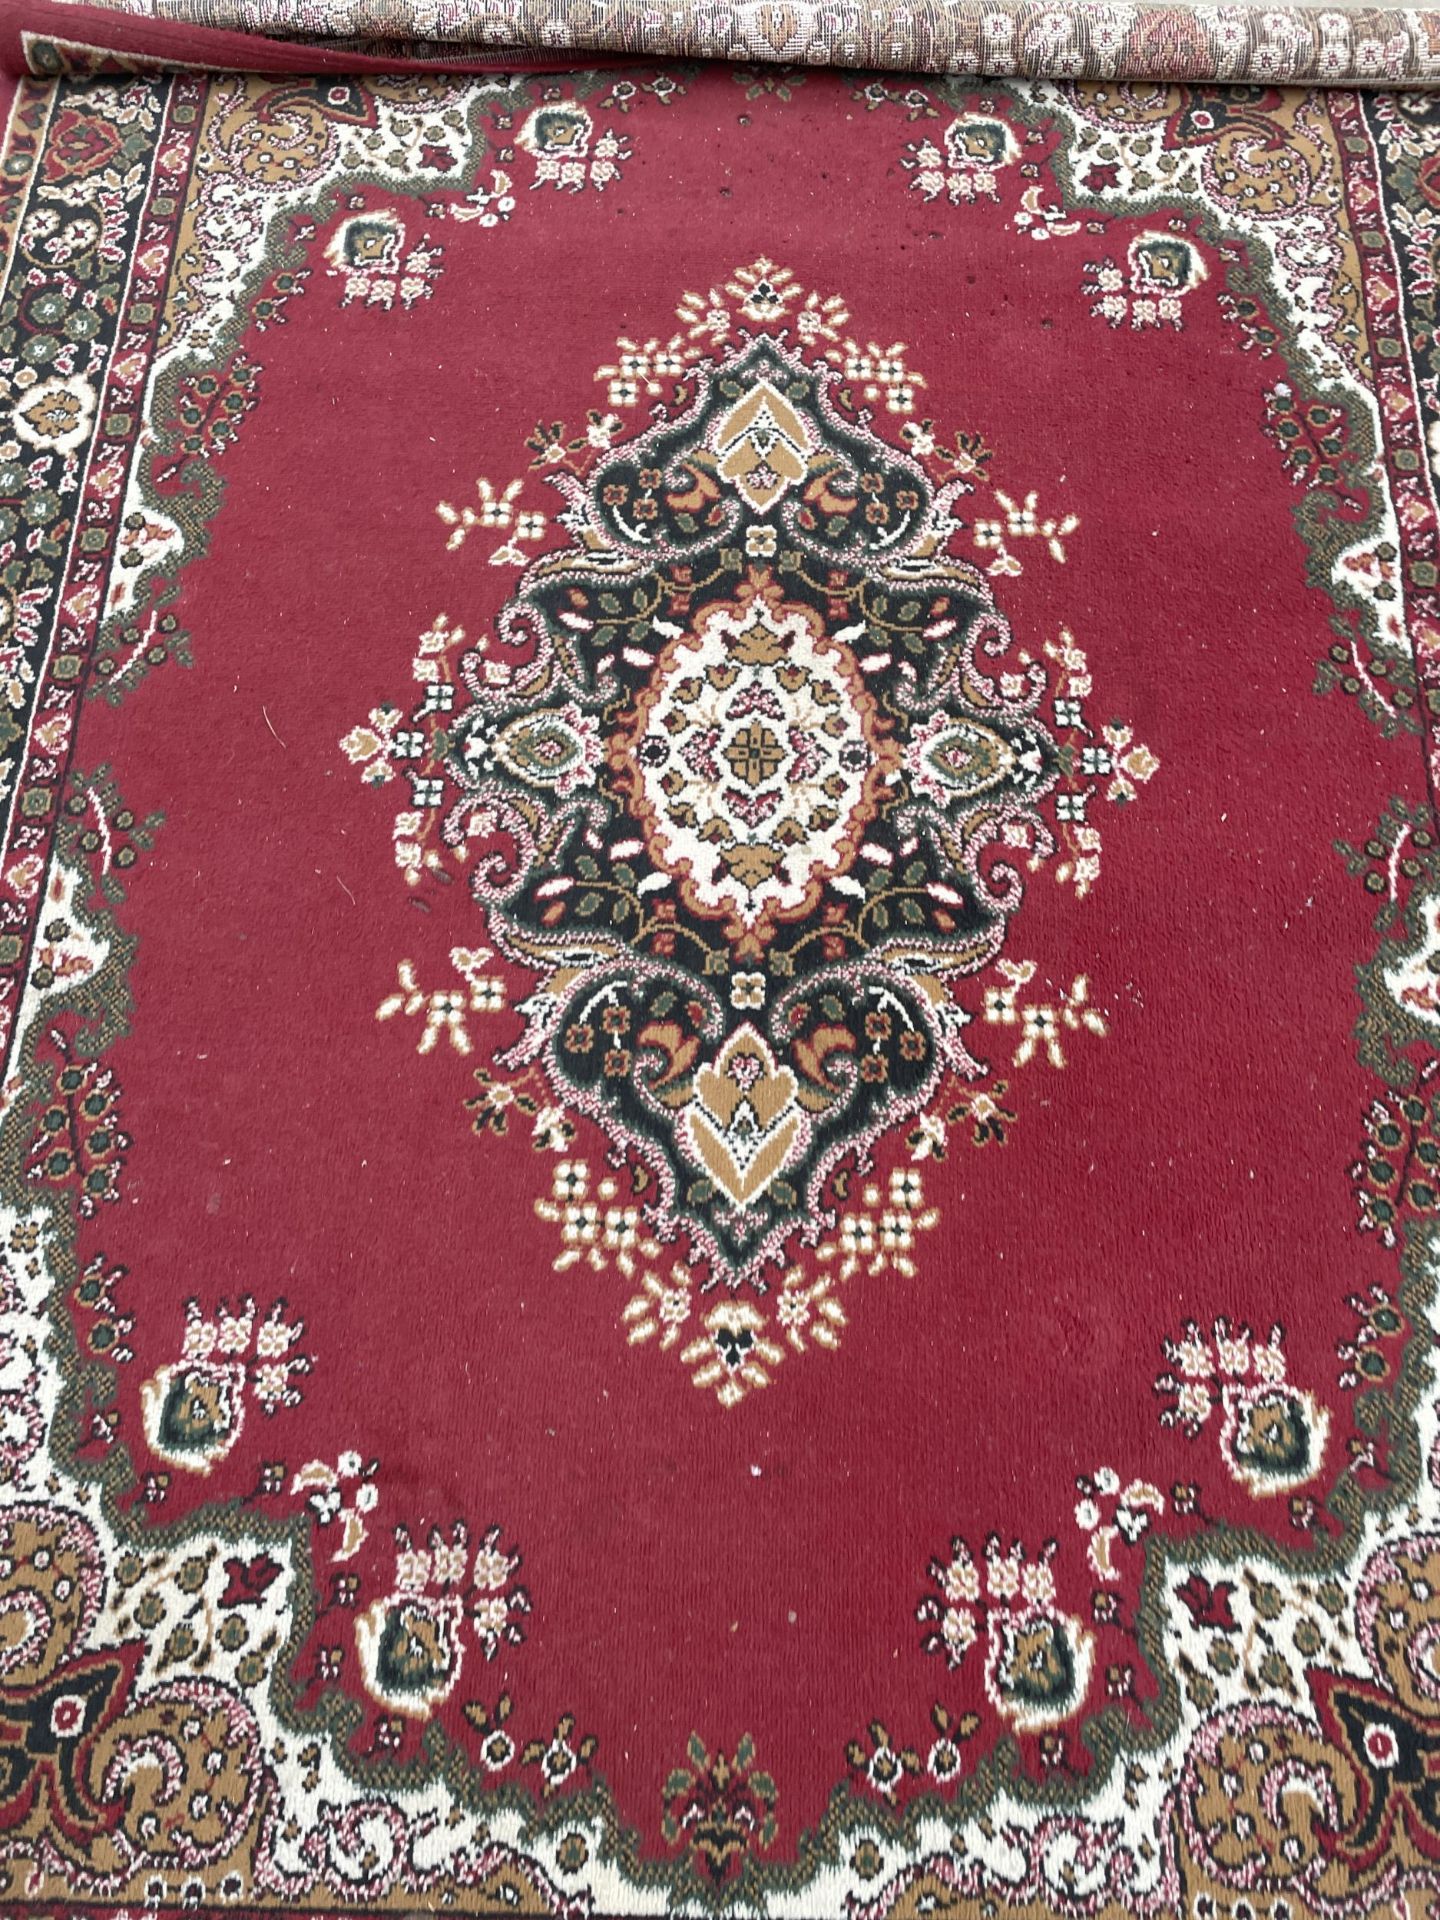 A RED PATTERNED RUG - Image 2 of 2